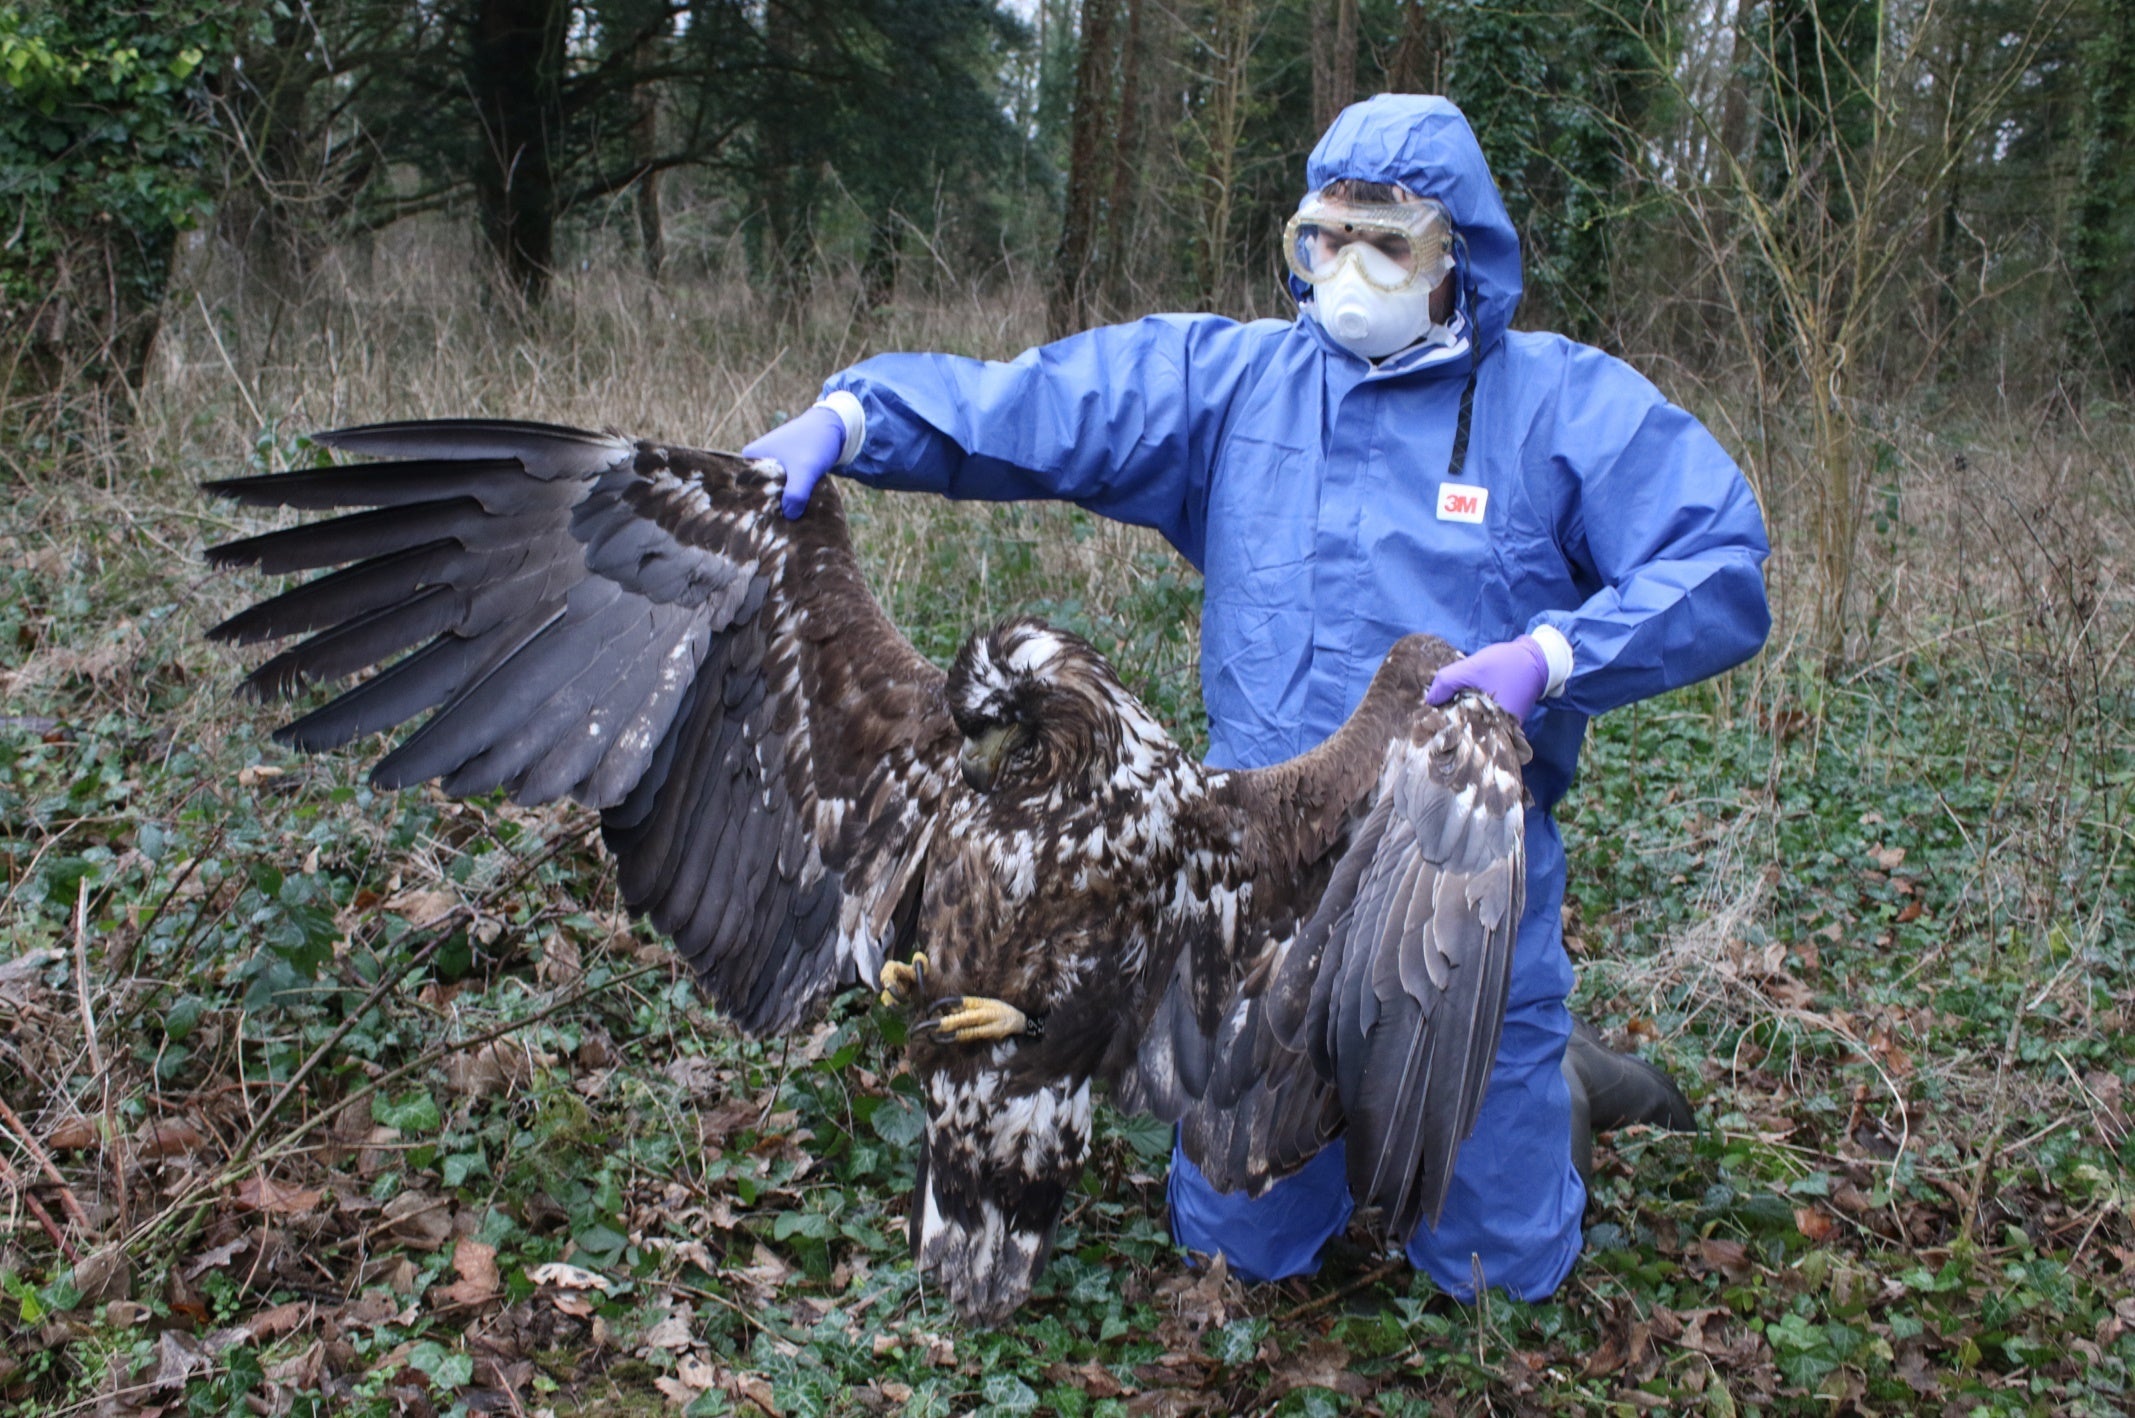 The white-tailed eagle found dead in Dorset earlier this year